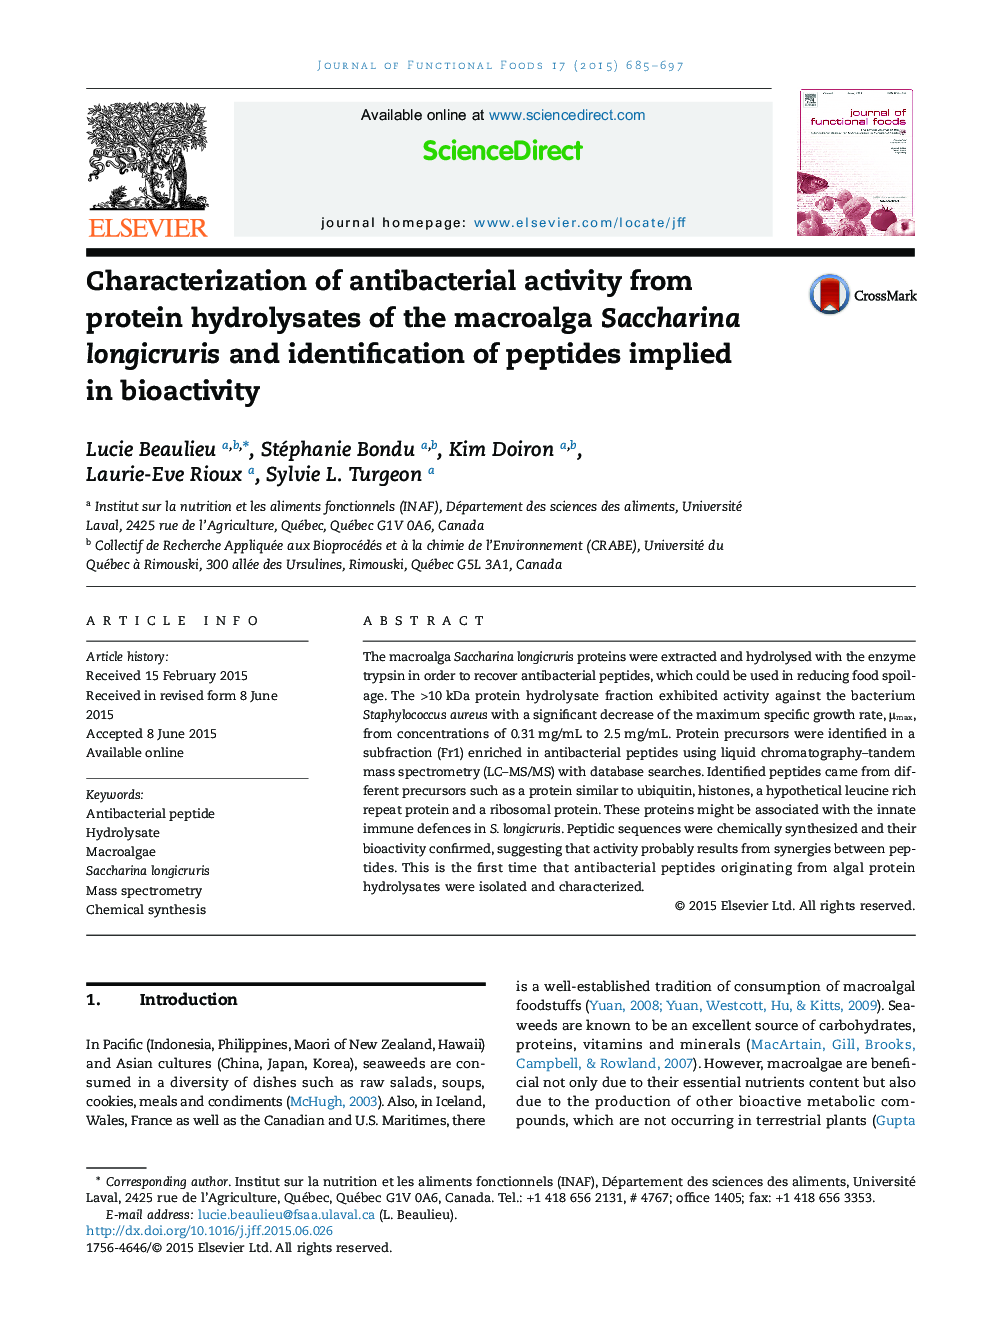 Characterization of antibacterial activity from protein hydrolysates of the macroalga Saccharina longicruris and identification of peptides implied in bioactivity